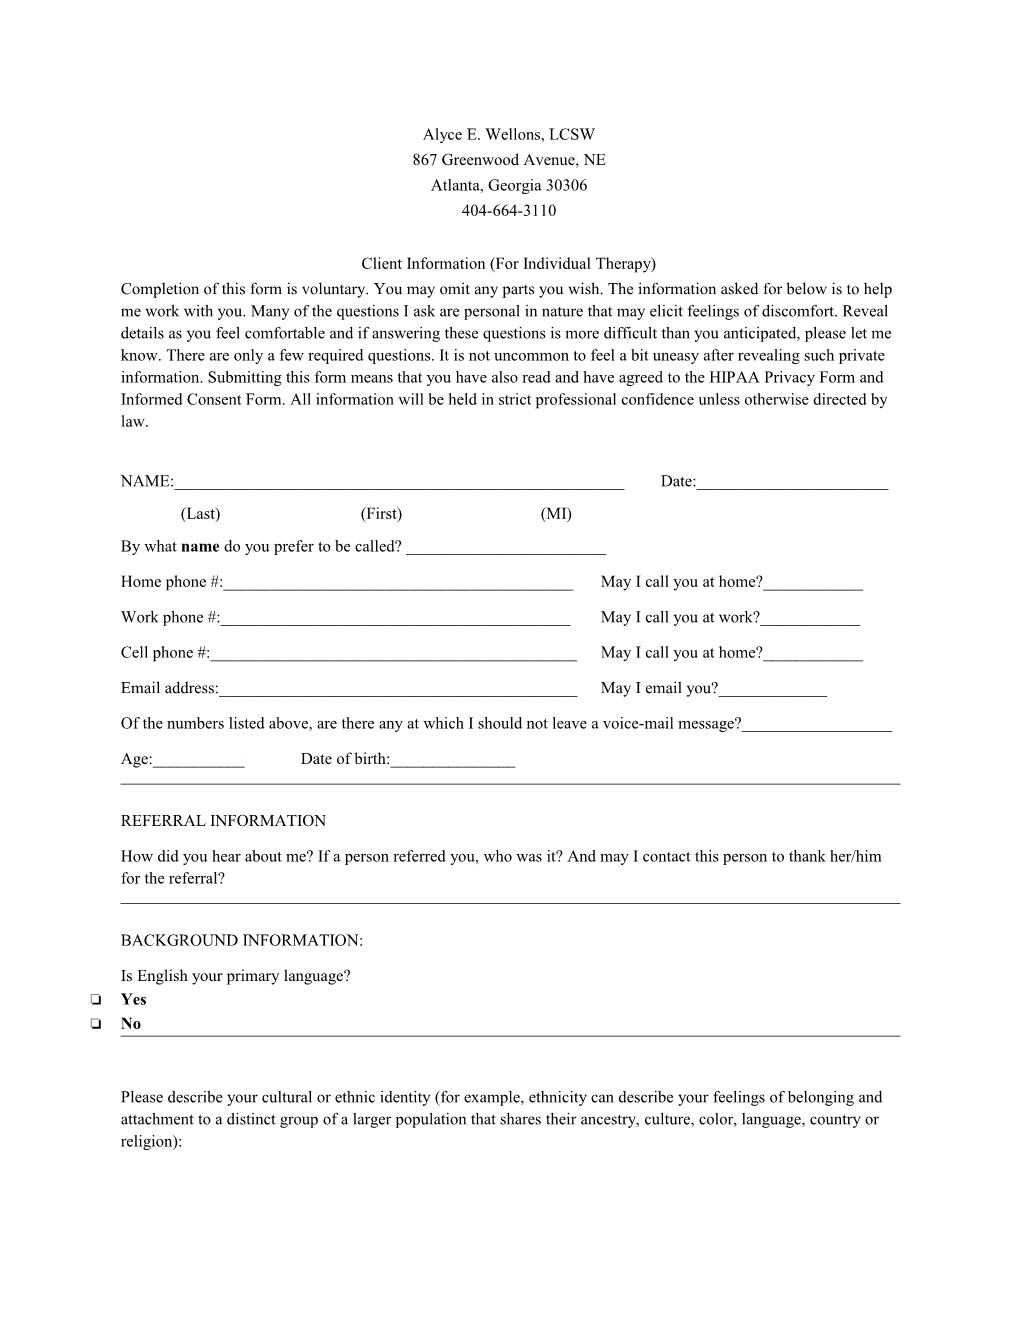 Initial Intake Form for Individual Clients - Alyce Wellons